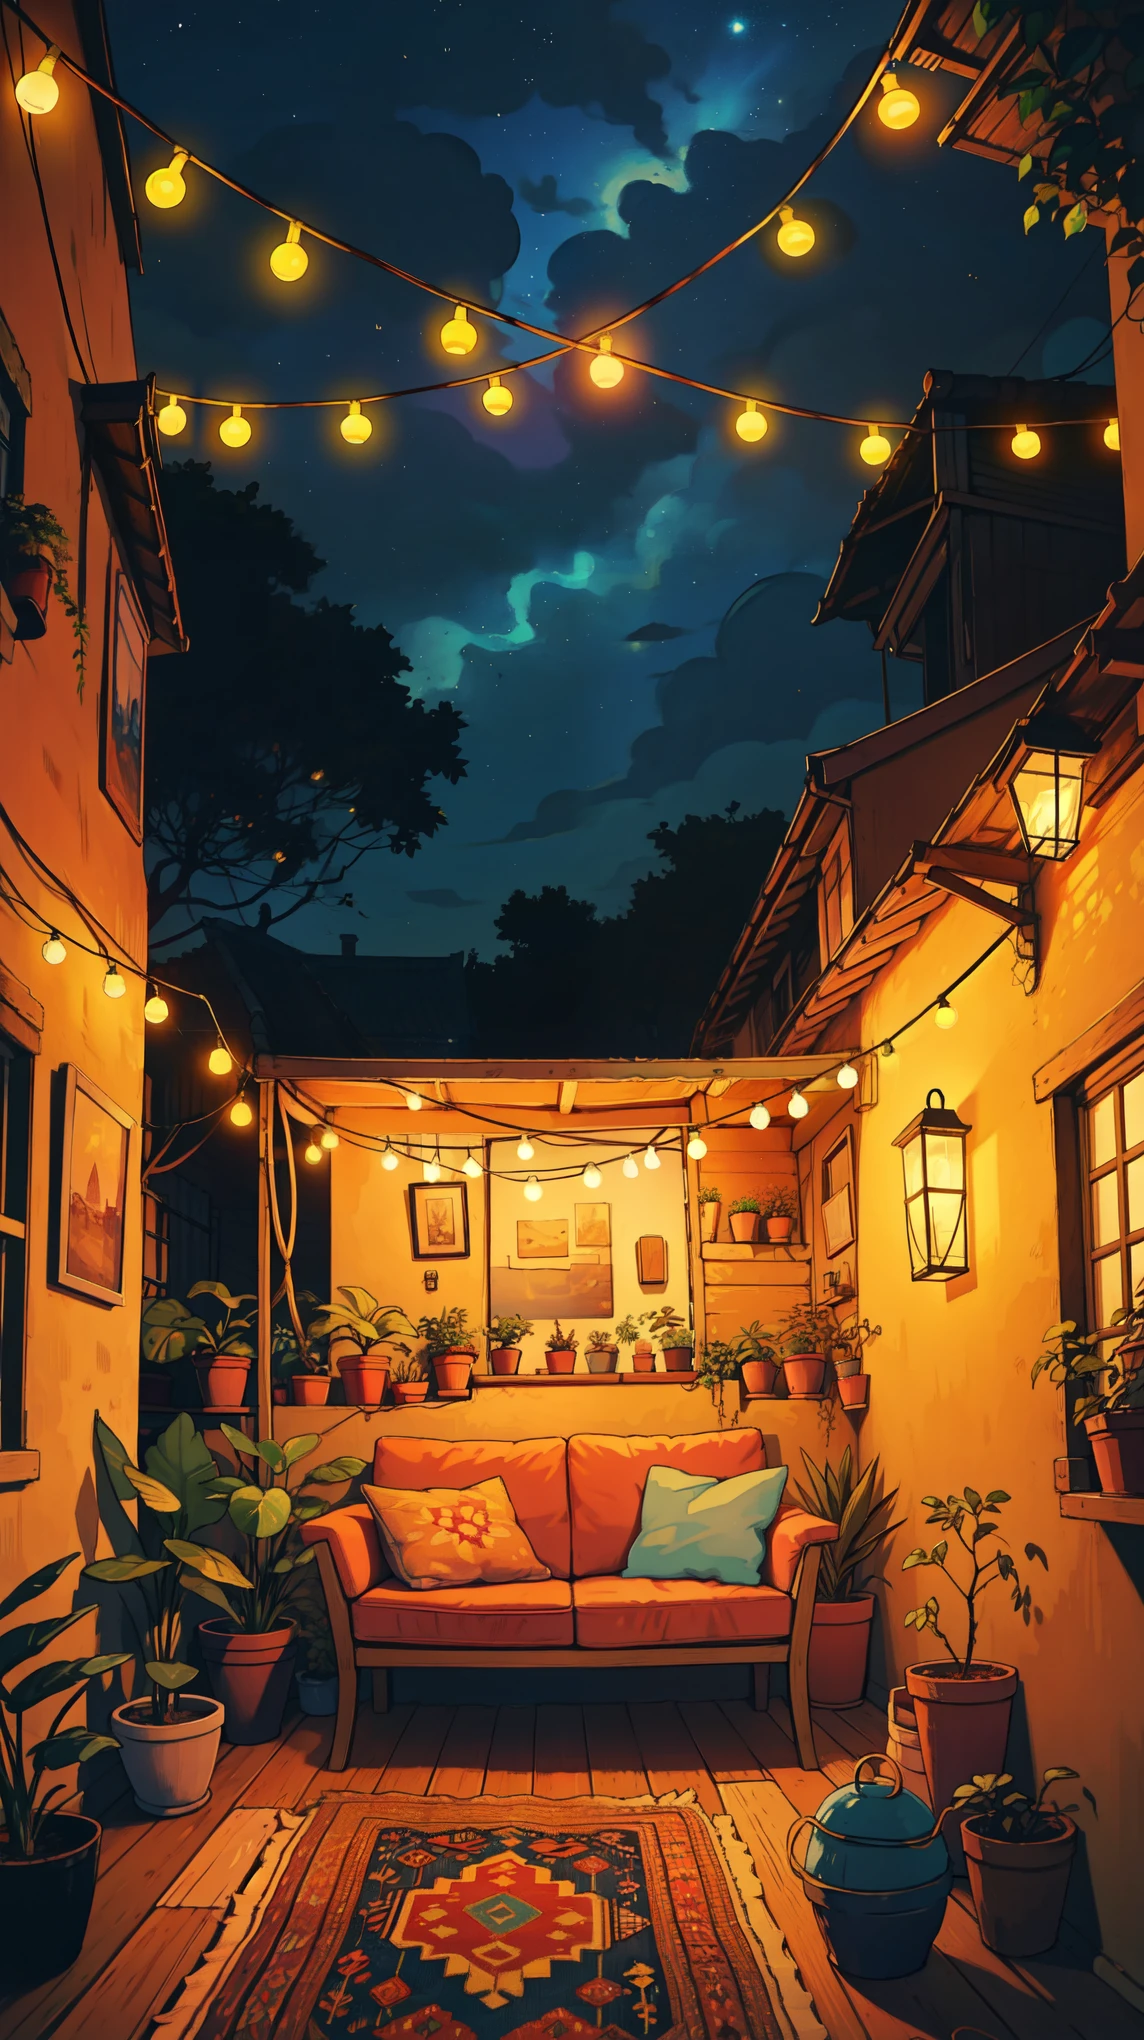 wide view, cozy terrace, sofa, orange string lights, leafy tropical plant pots, gypsy aesthetics, starry pink blue sky, earthy tones, colorful string lights, guitar, shed, boho carpet, decorations, cozy atmosphere, night time, micro landscape, intrinsic details